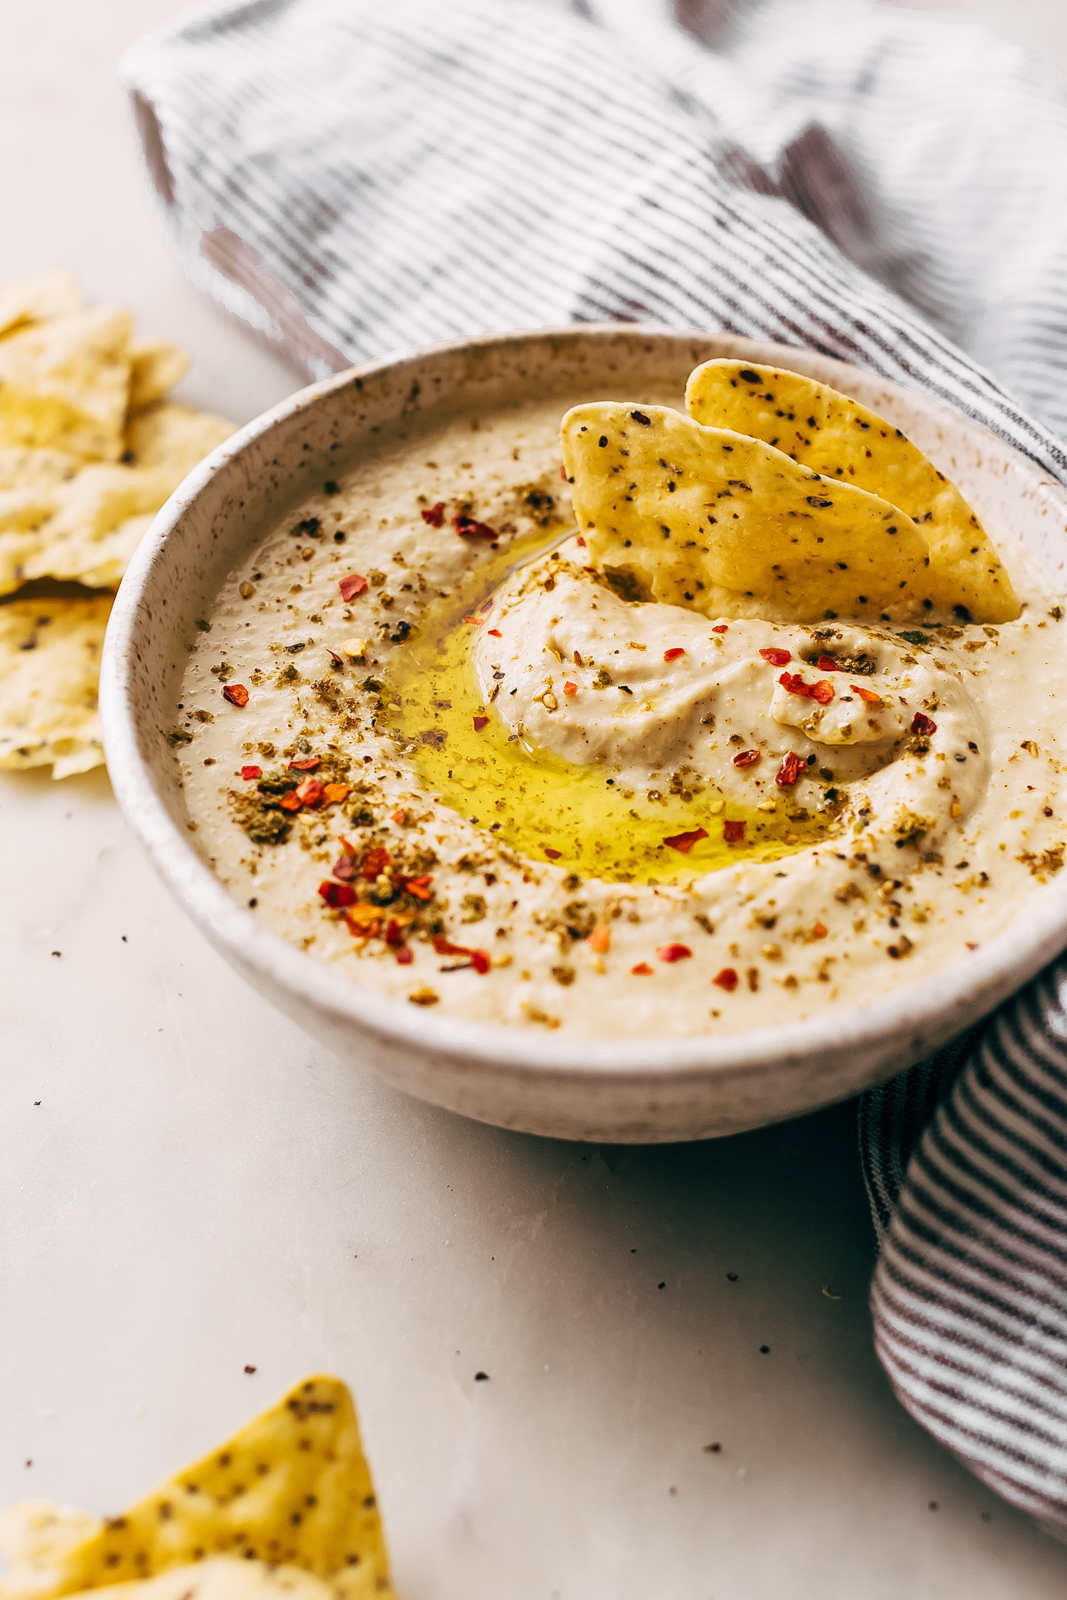 hummus in mottled bowl with zaatar and red pepper flakes on top with tortilla chips